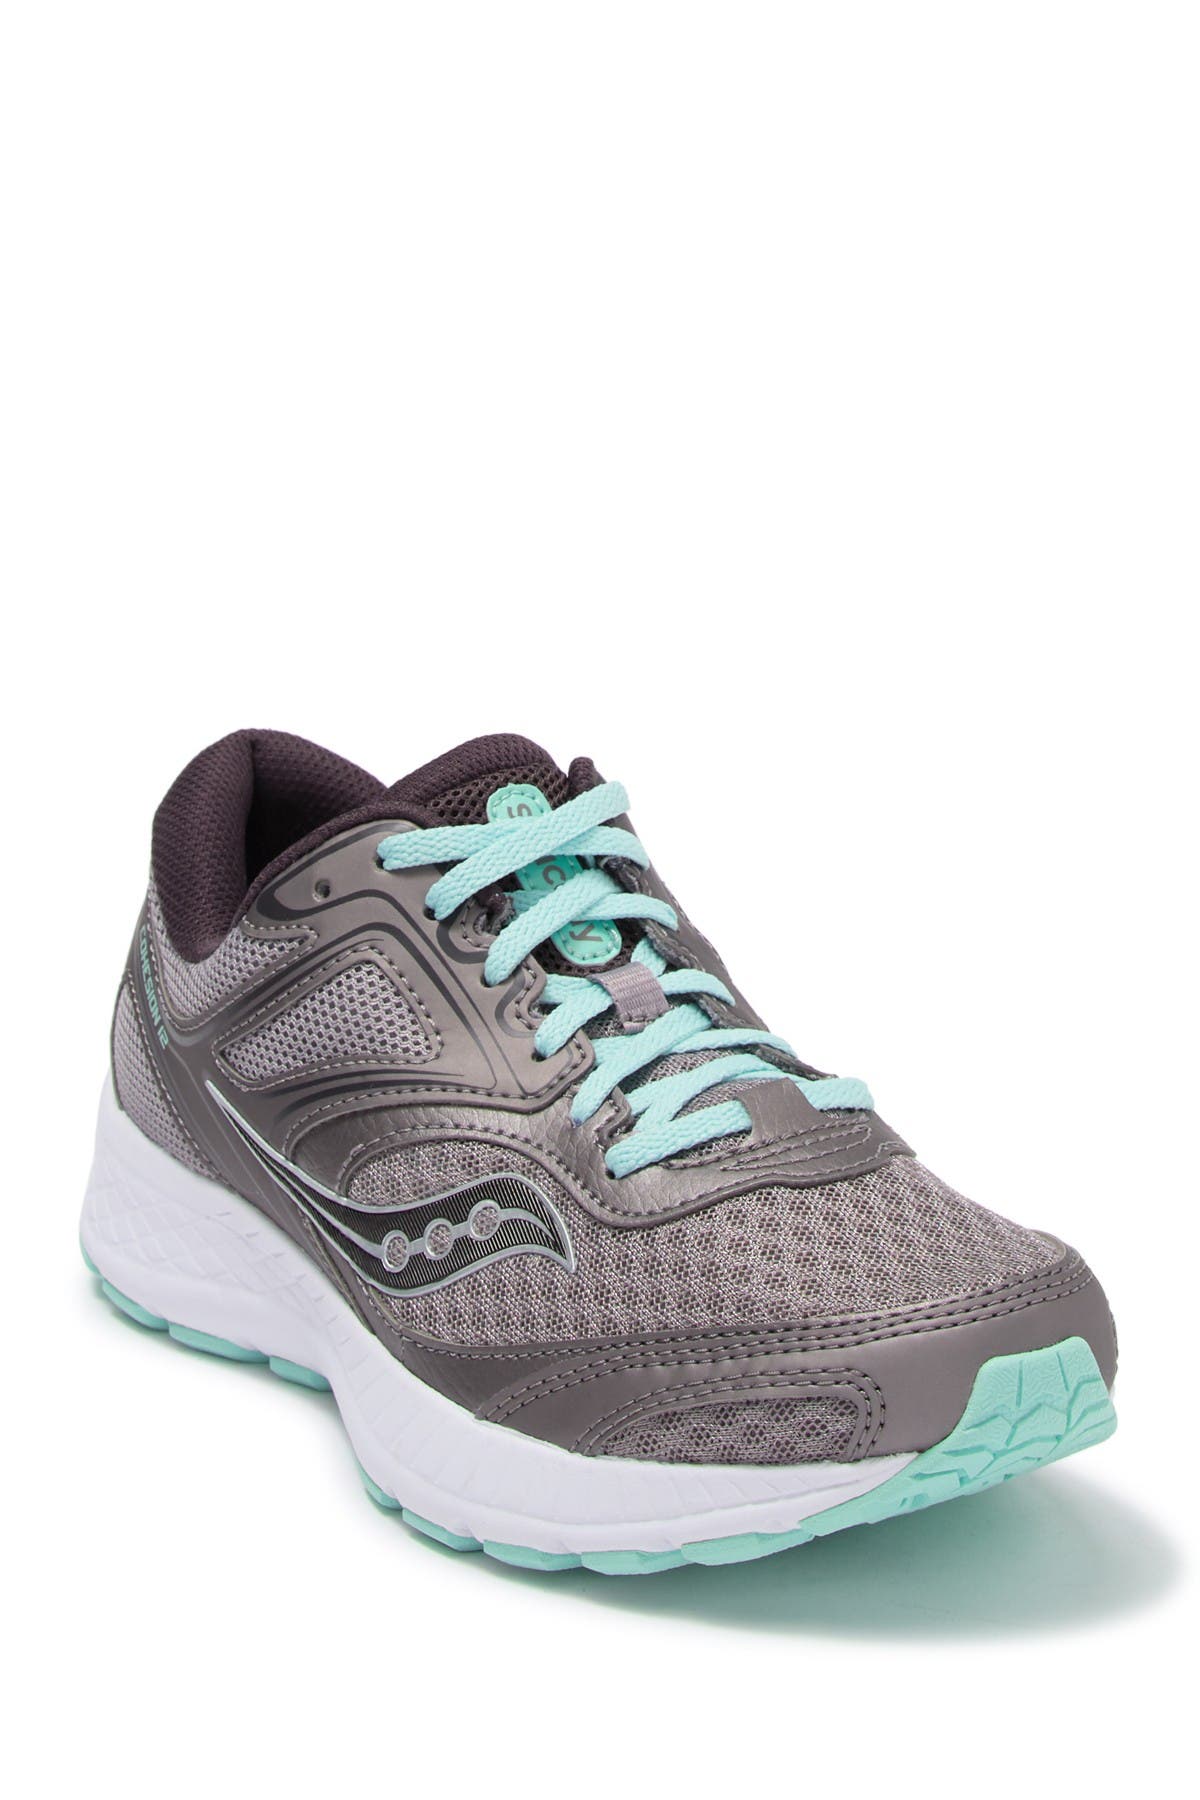 saucony cohesion 12 wide